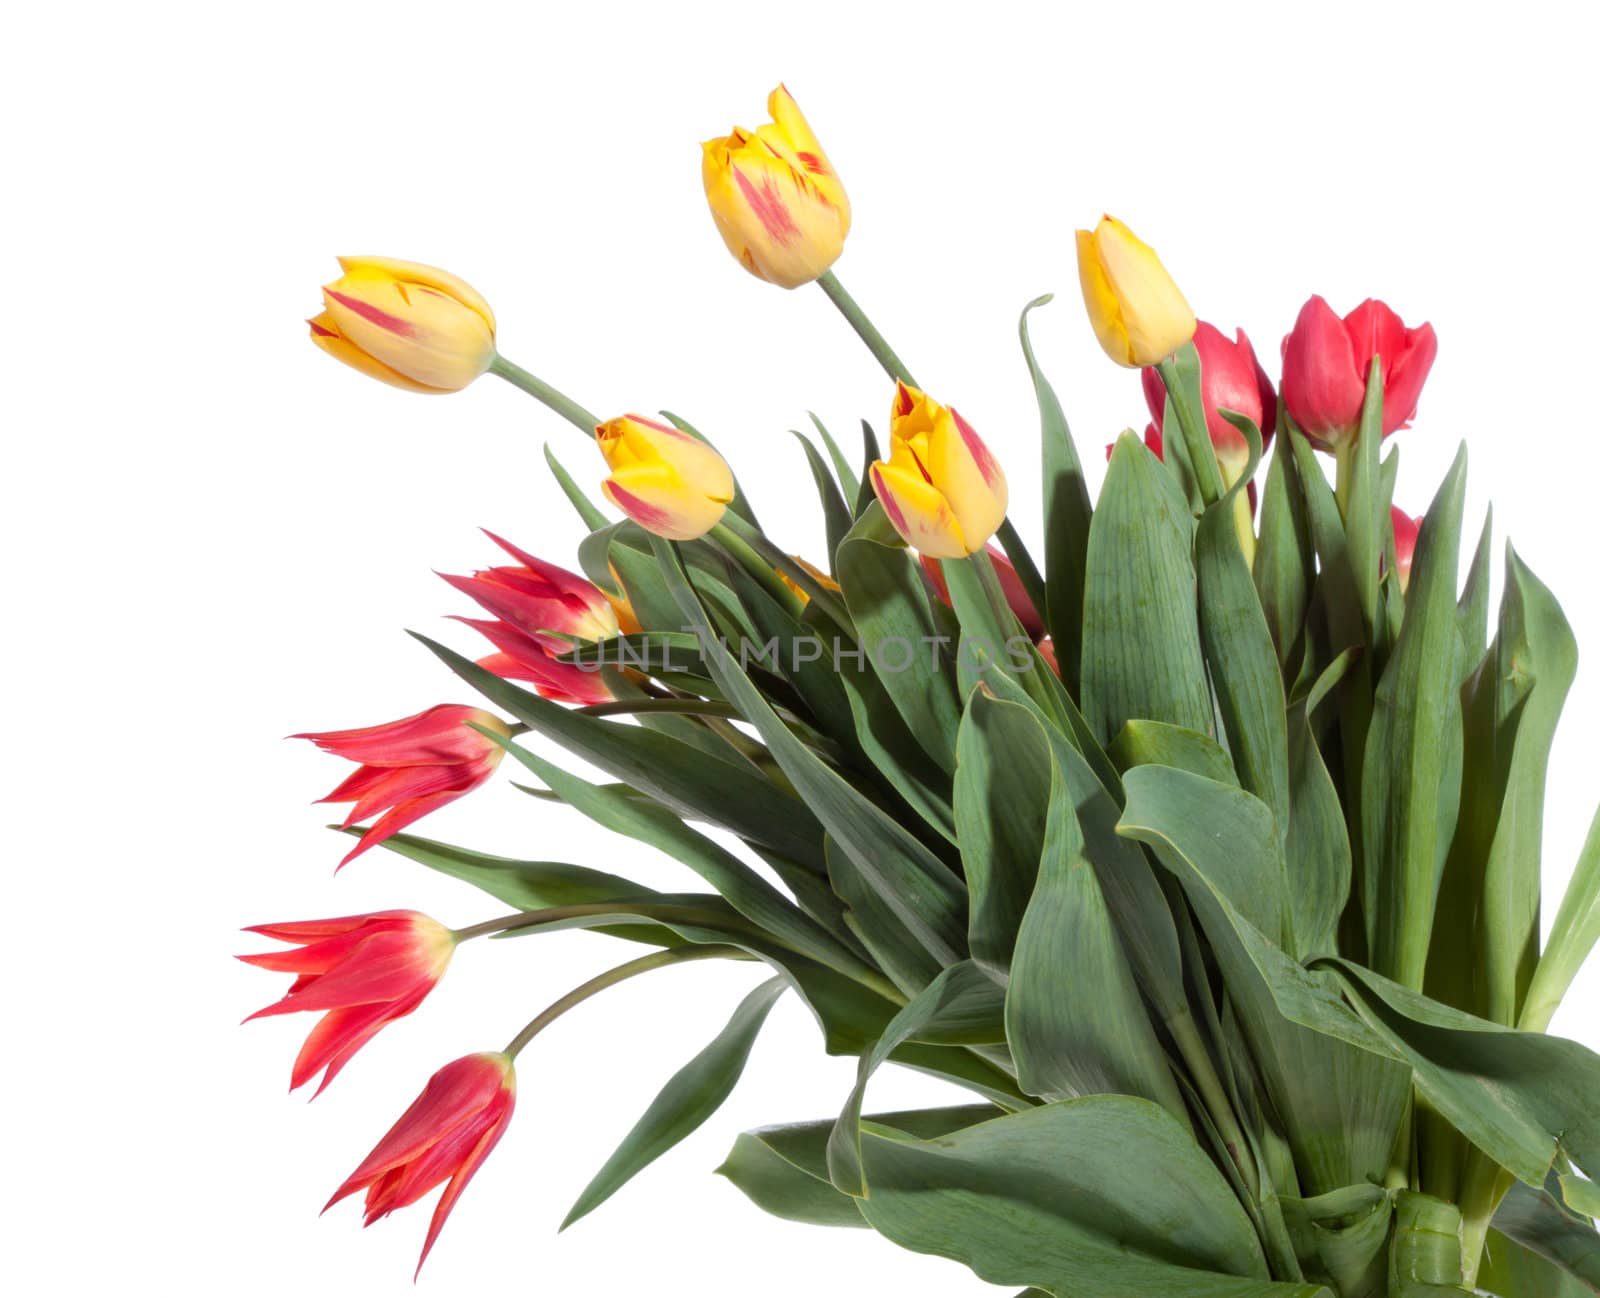 Bouquet of fresh tulips by aguirre_mar